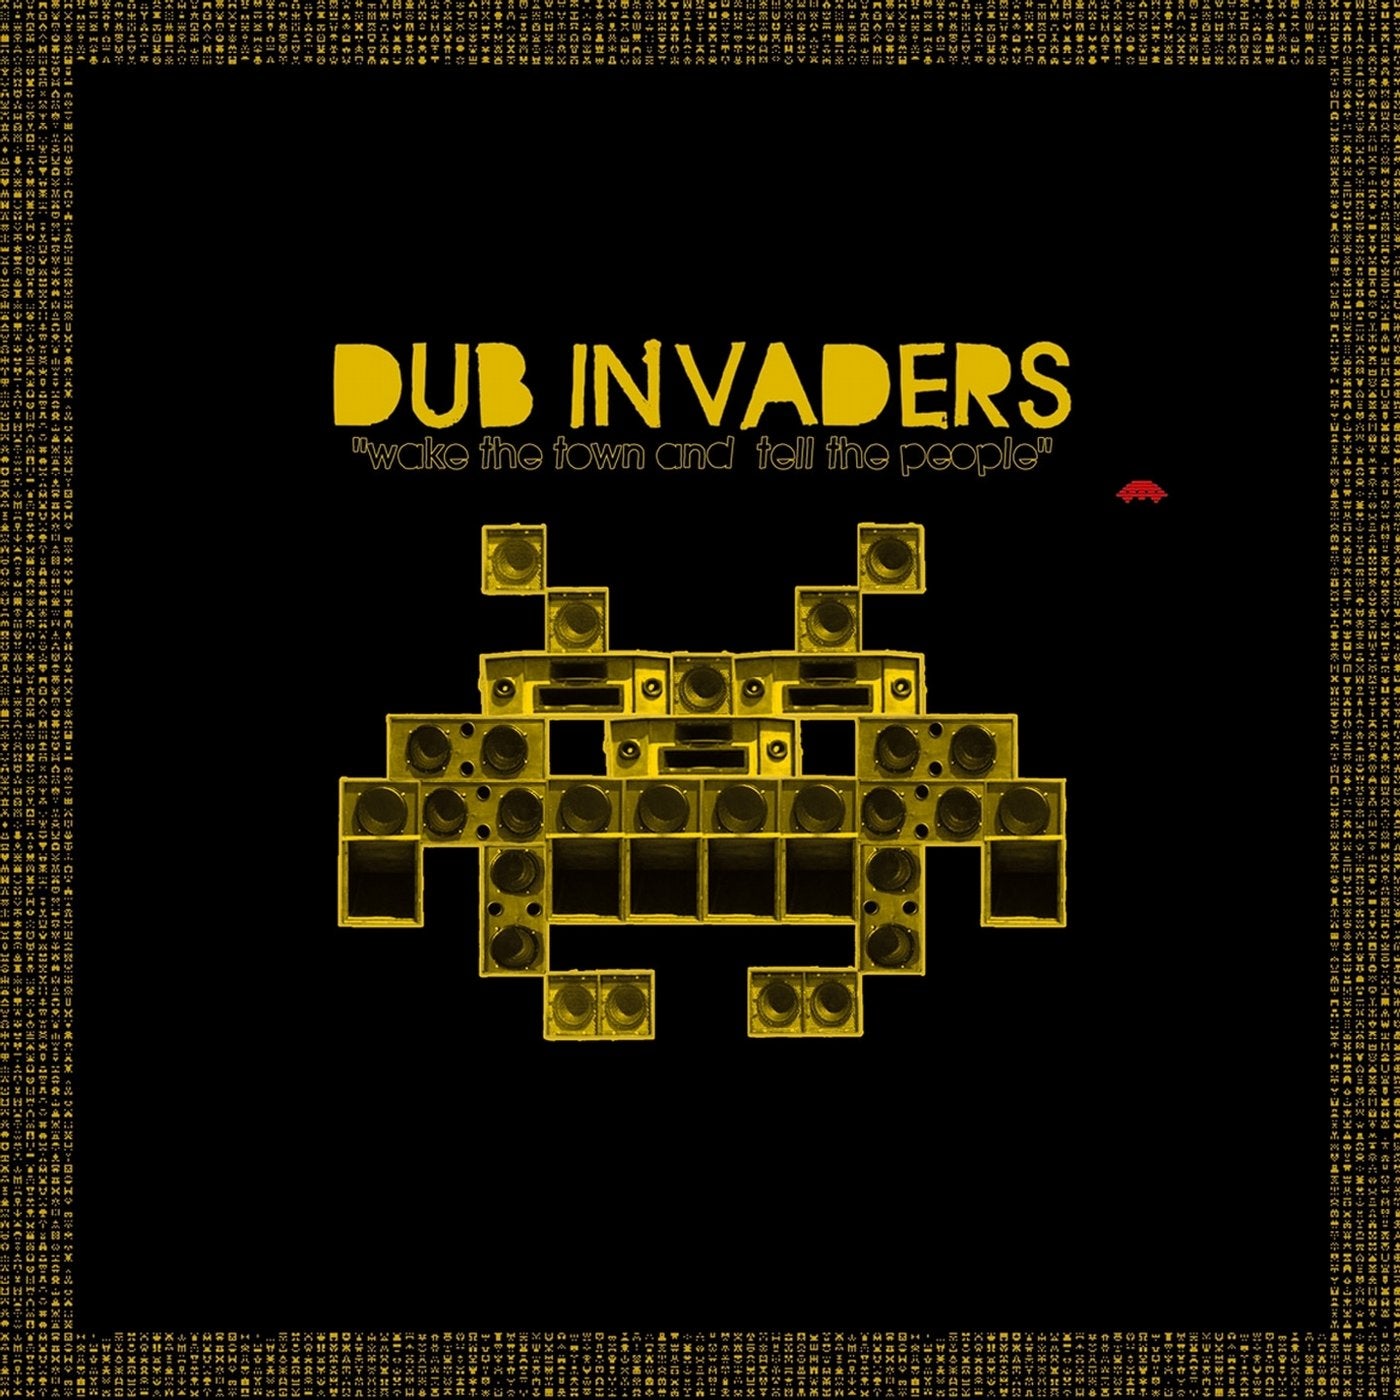 High Tone Presents Dub Invaders (Wake the Town and Tell the People)